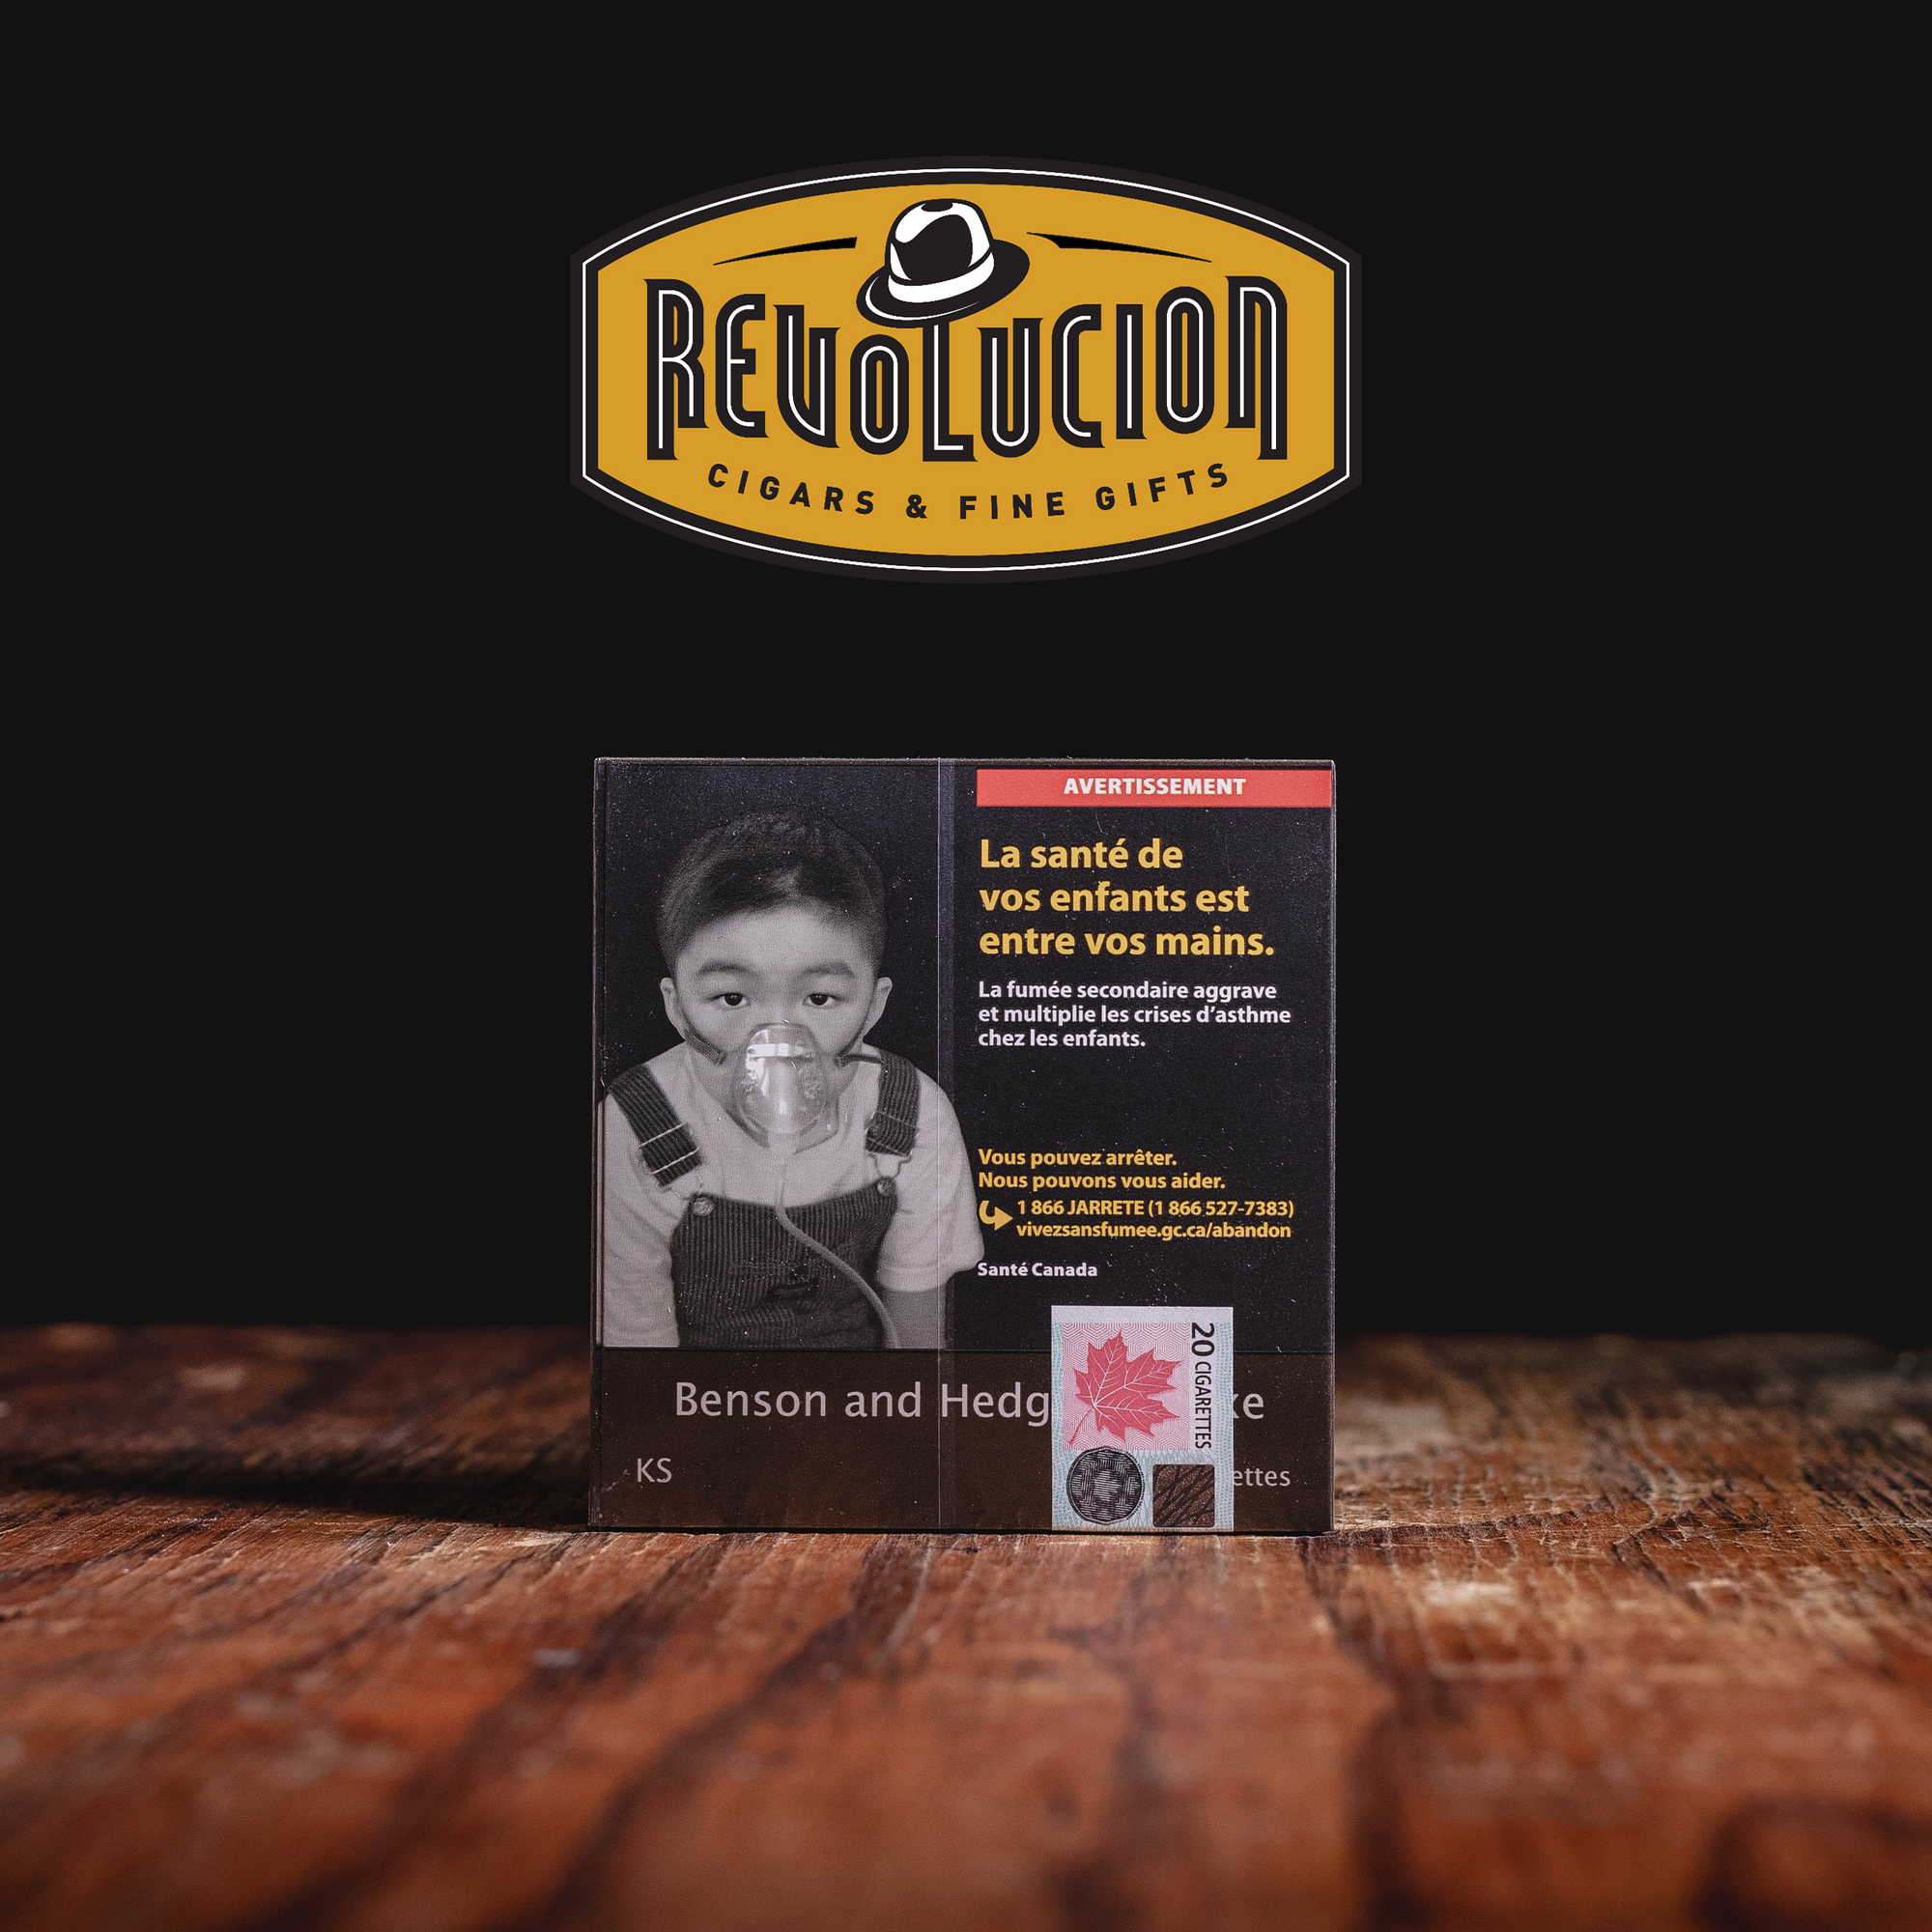 Benson Hedges Deluxe King Size Cigarettes - Pack of 20